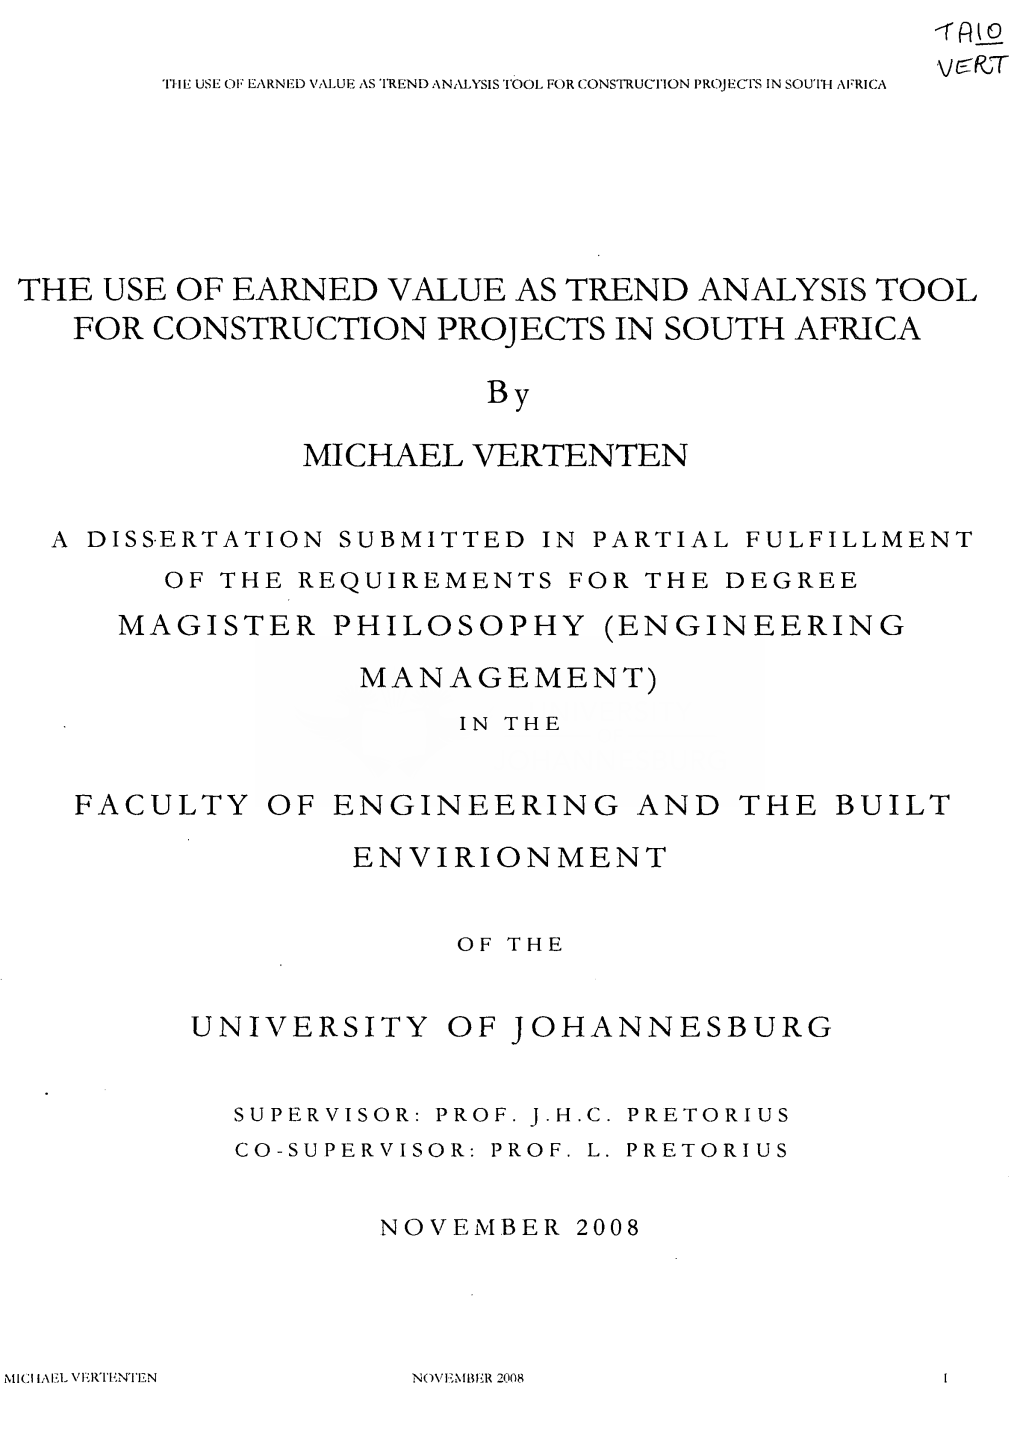 The Use of Earned Value As Trend Analysis Tool for Construction Projects in South Africa